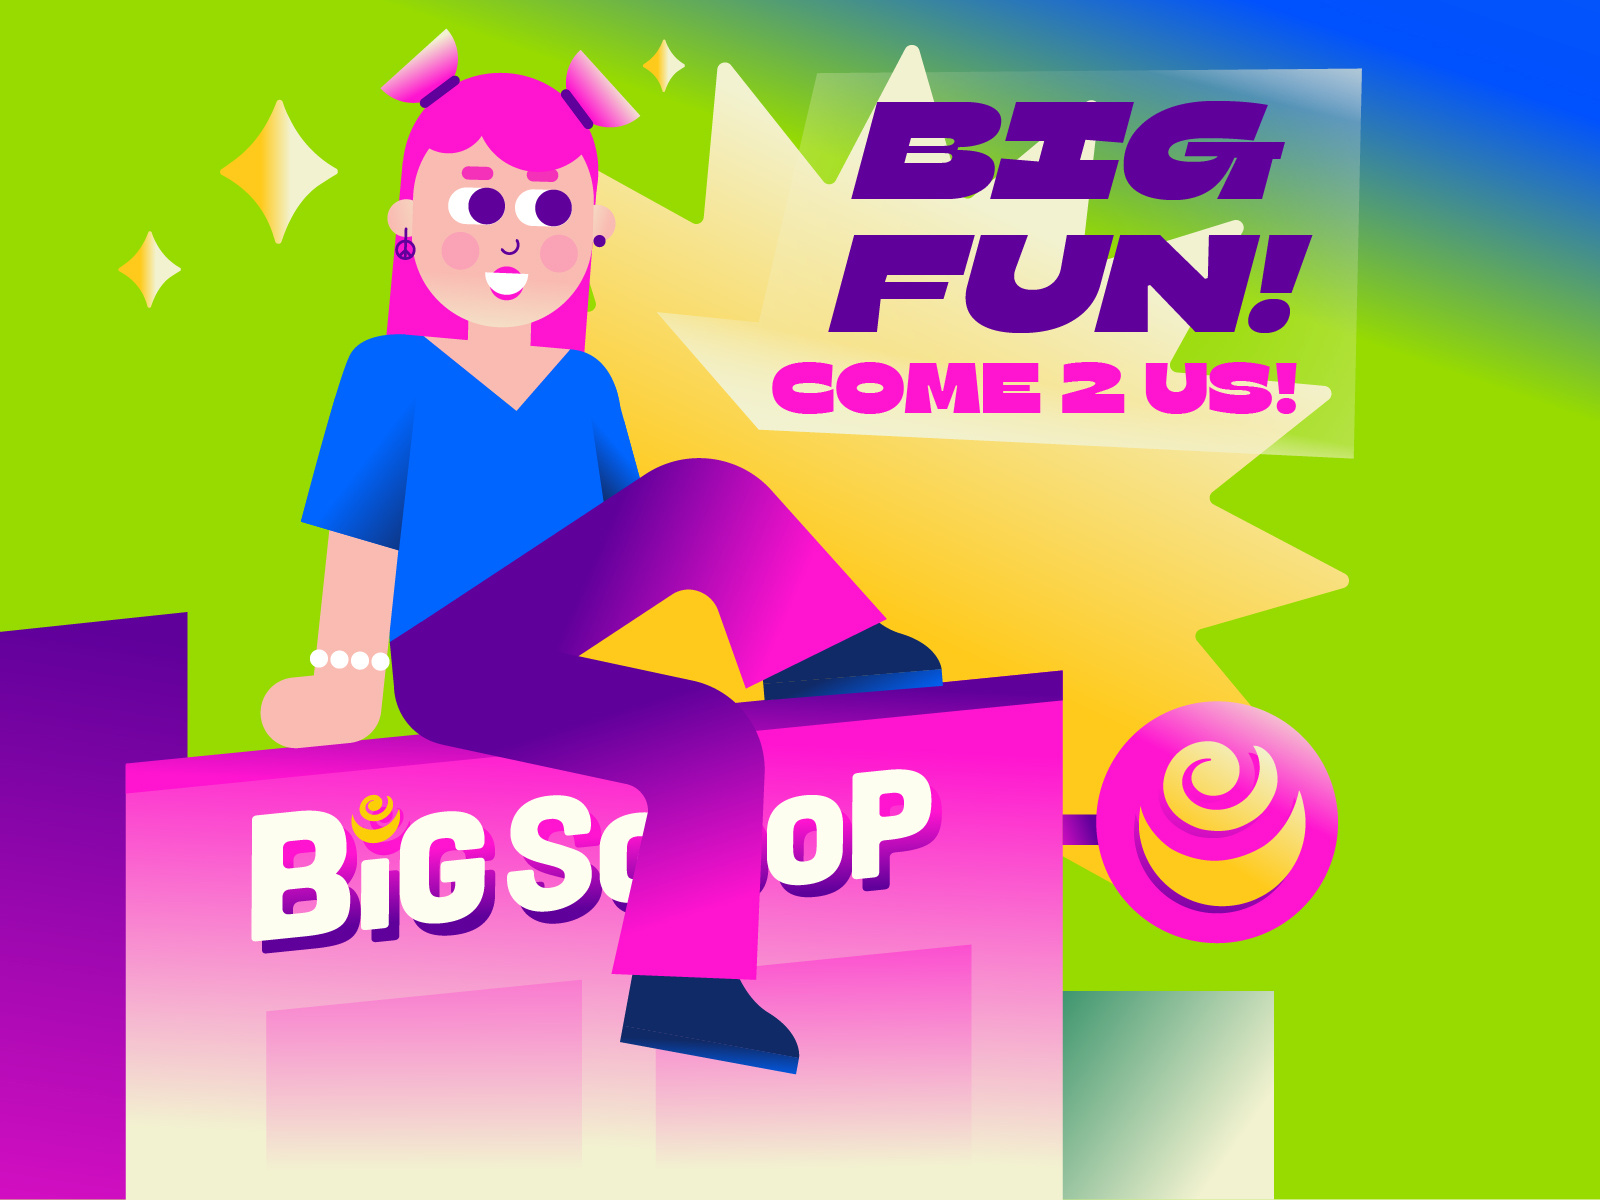 Big Scoop Summer Campaign Pt2 By Albert Sopa For Honedon On Dribbble 4013